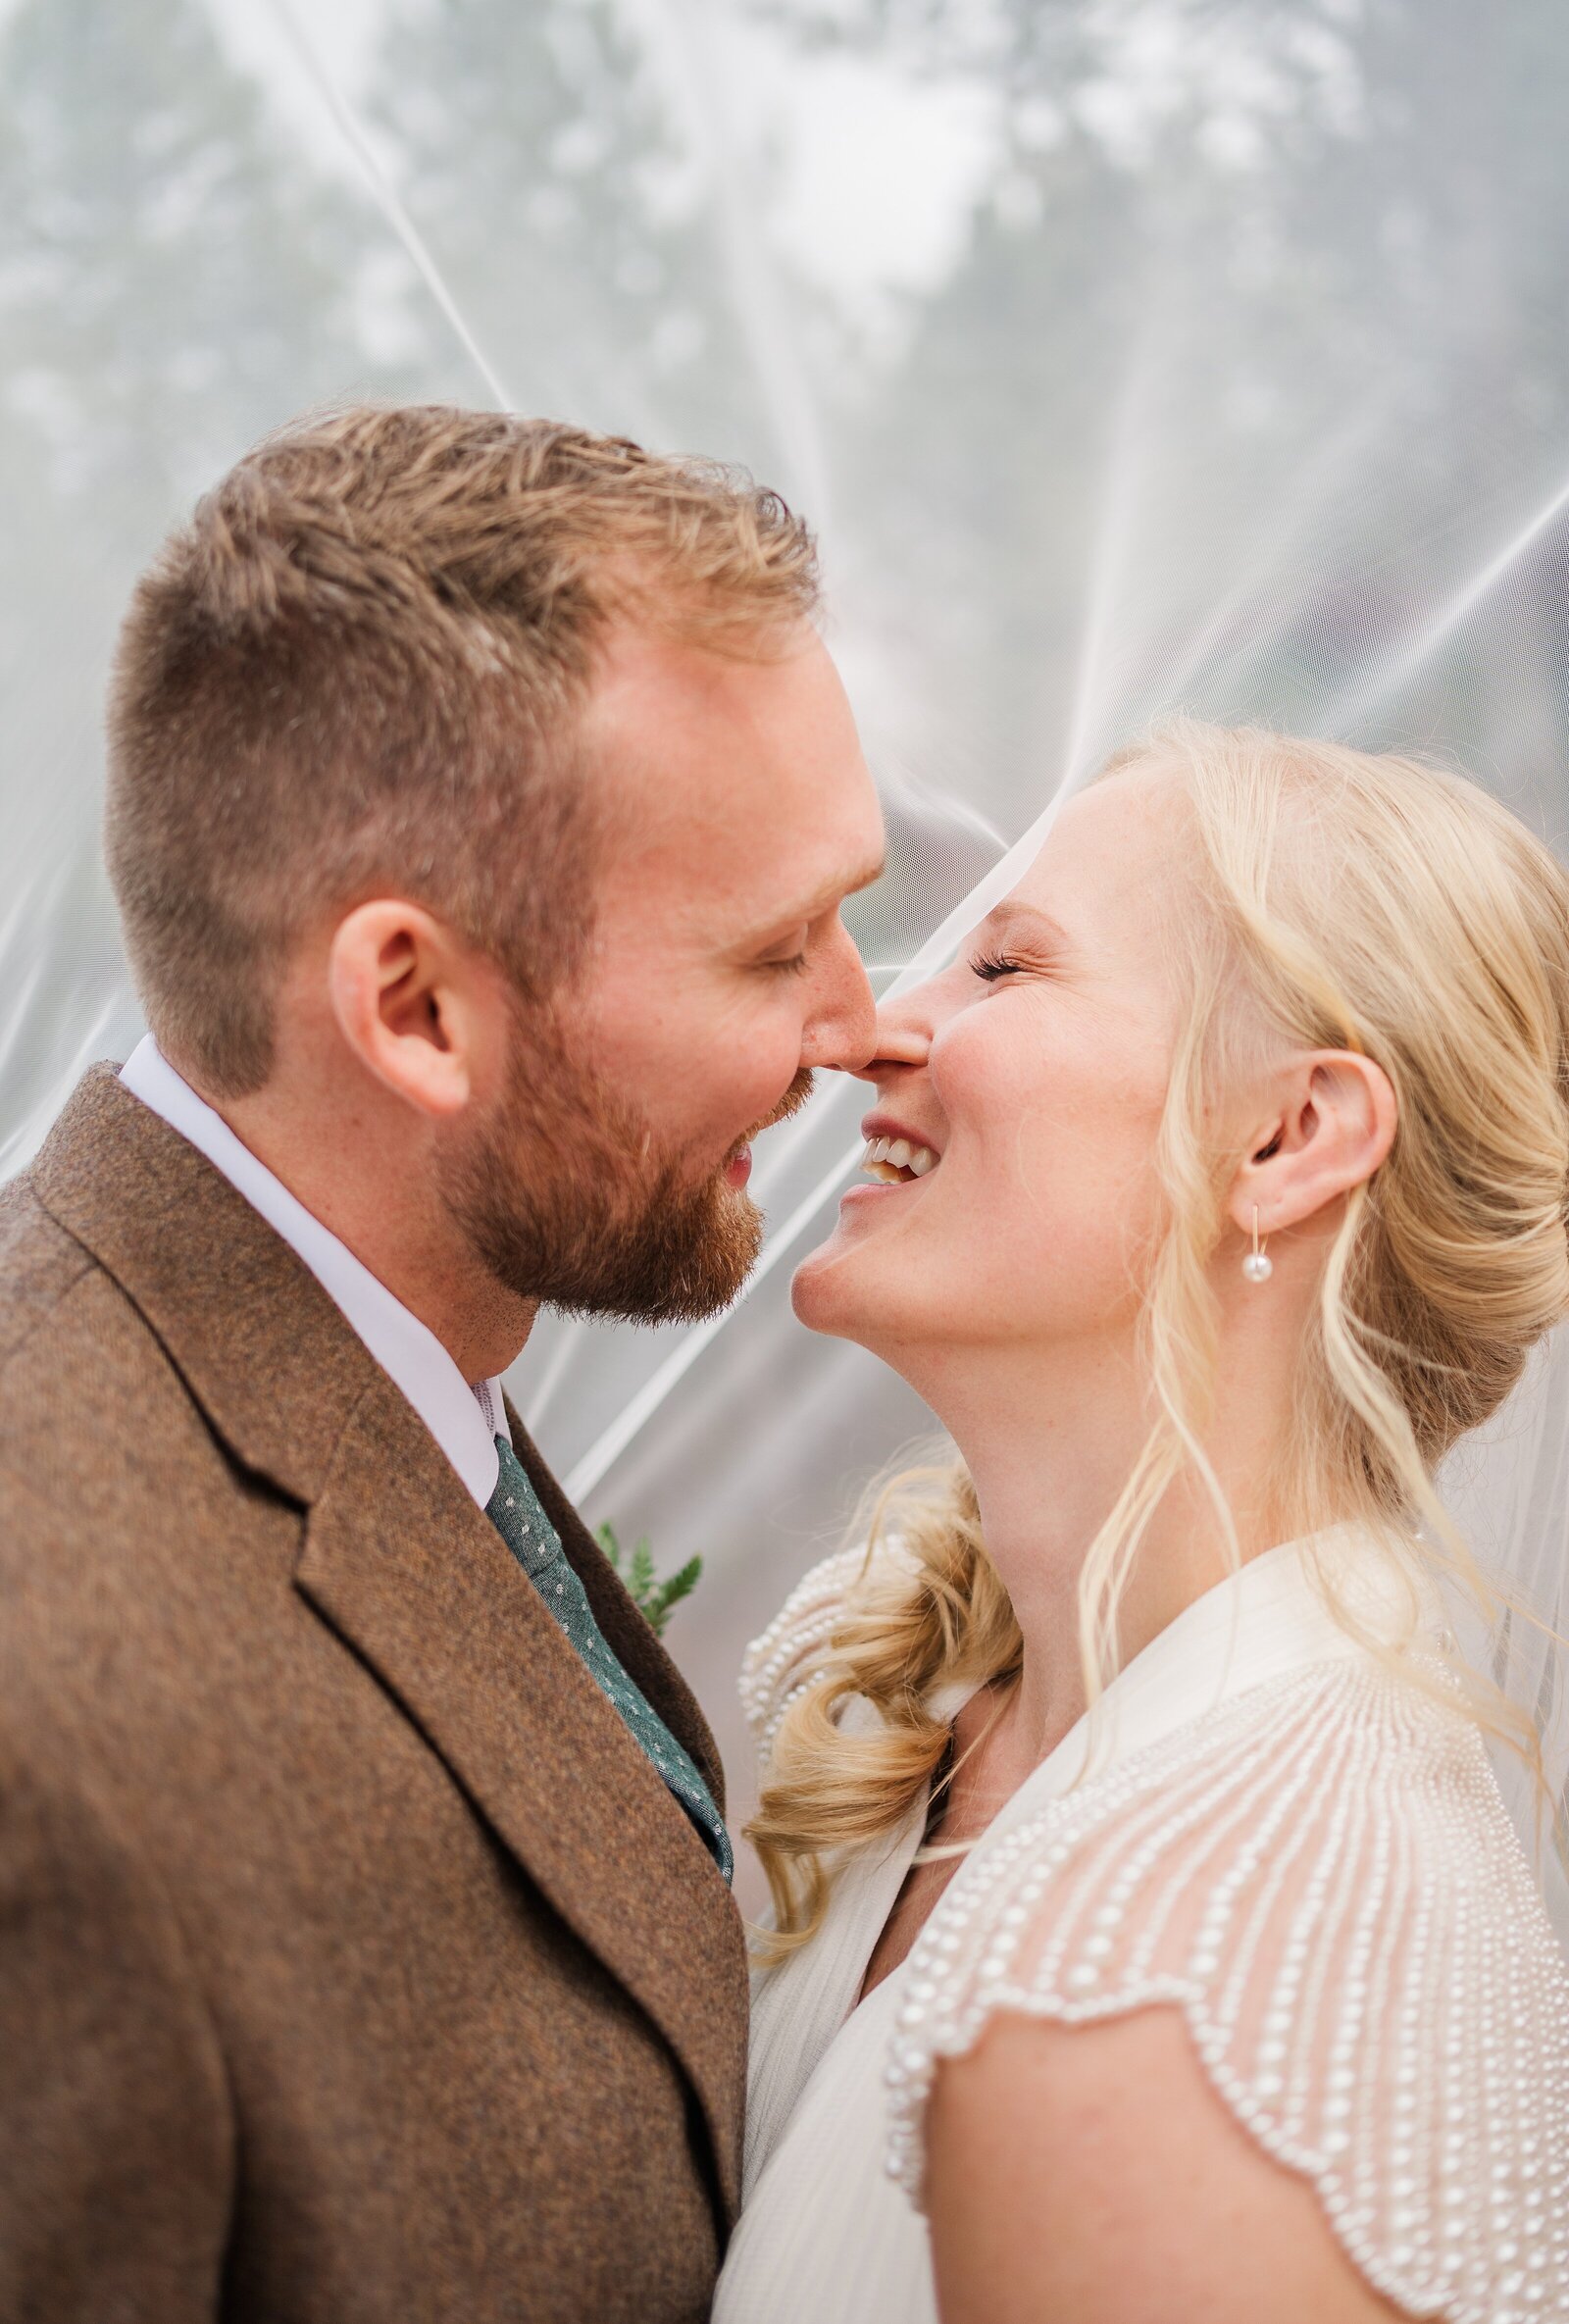 Whether you're celebrating a milestone or just because, Samantha Immer's customized photography sessions are the perfect way to capture your love in the moment. With a focus on authenticity and joy, you'll treasure these photos forever.